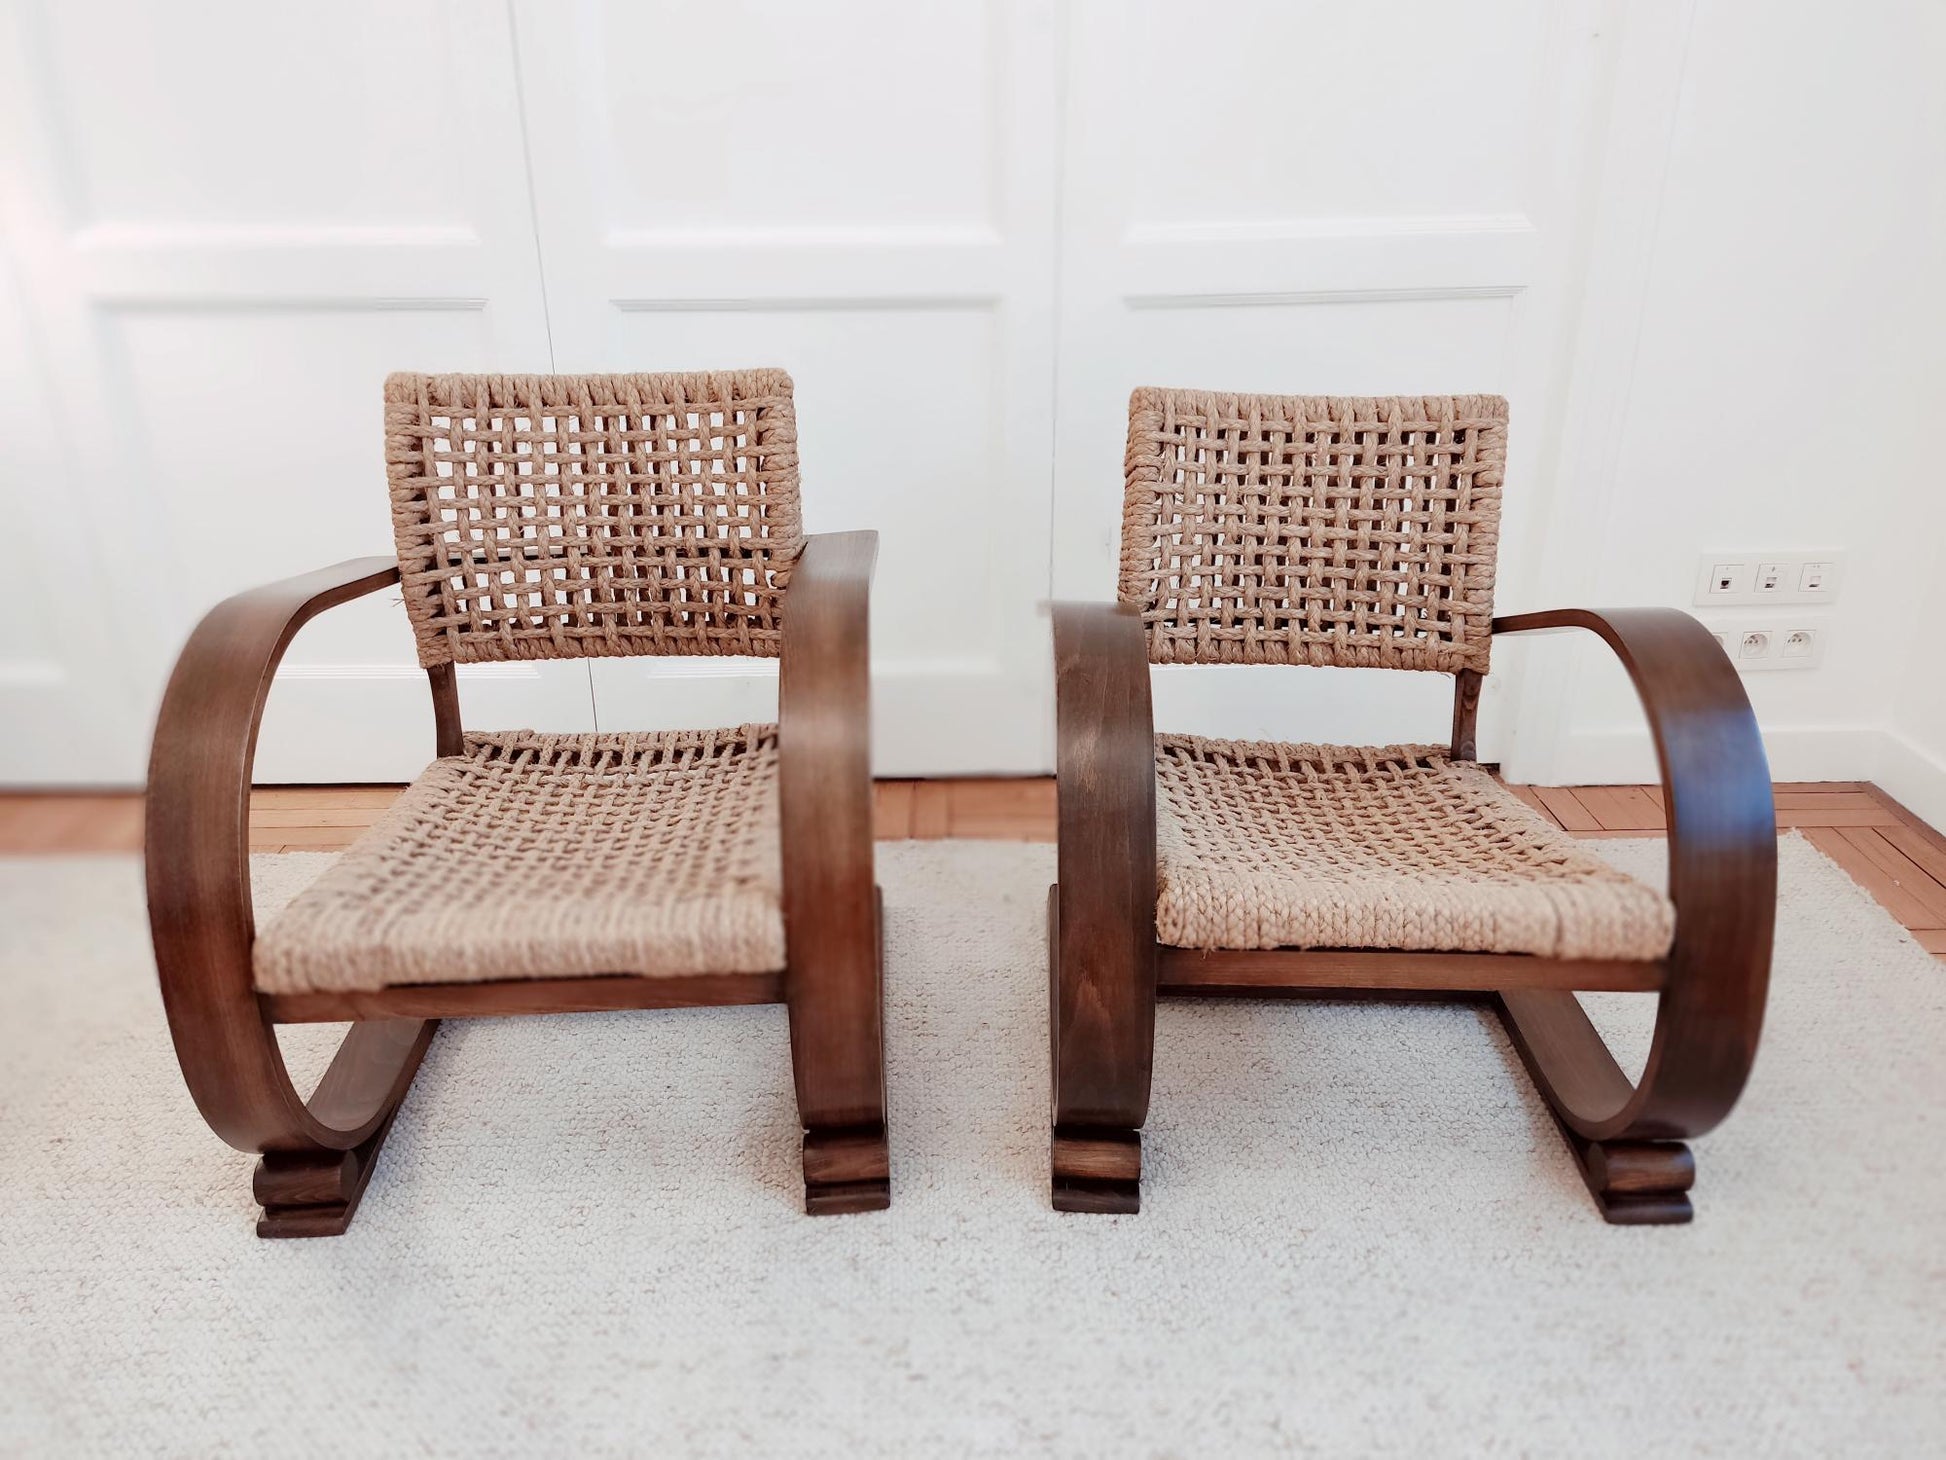 Audoux & Minet Rope Chairs Chairs